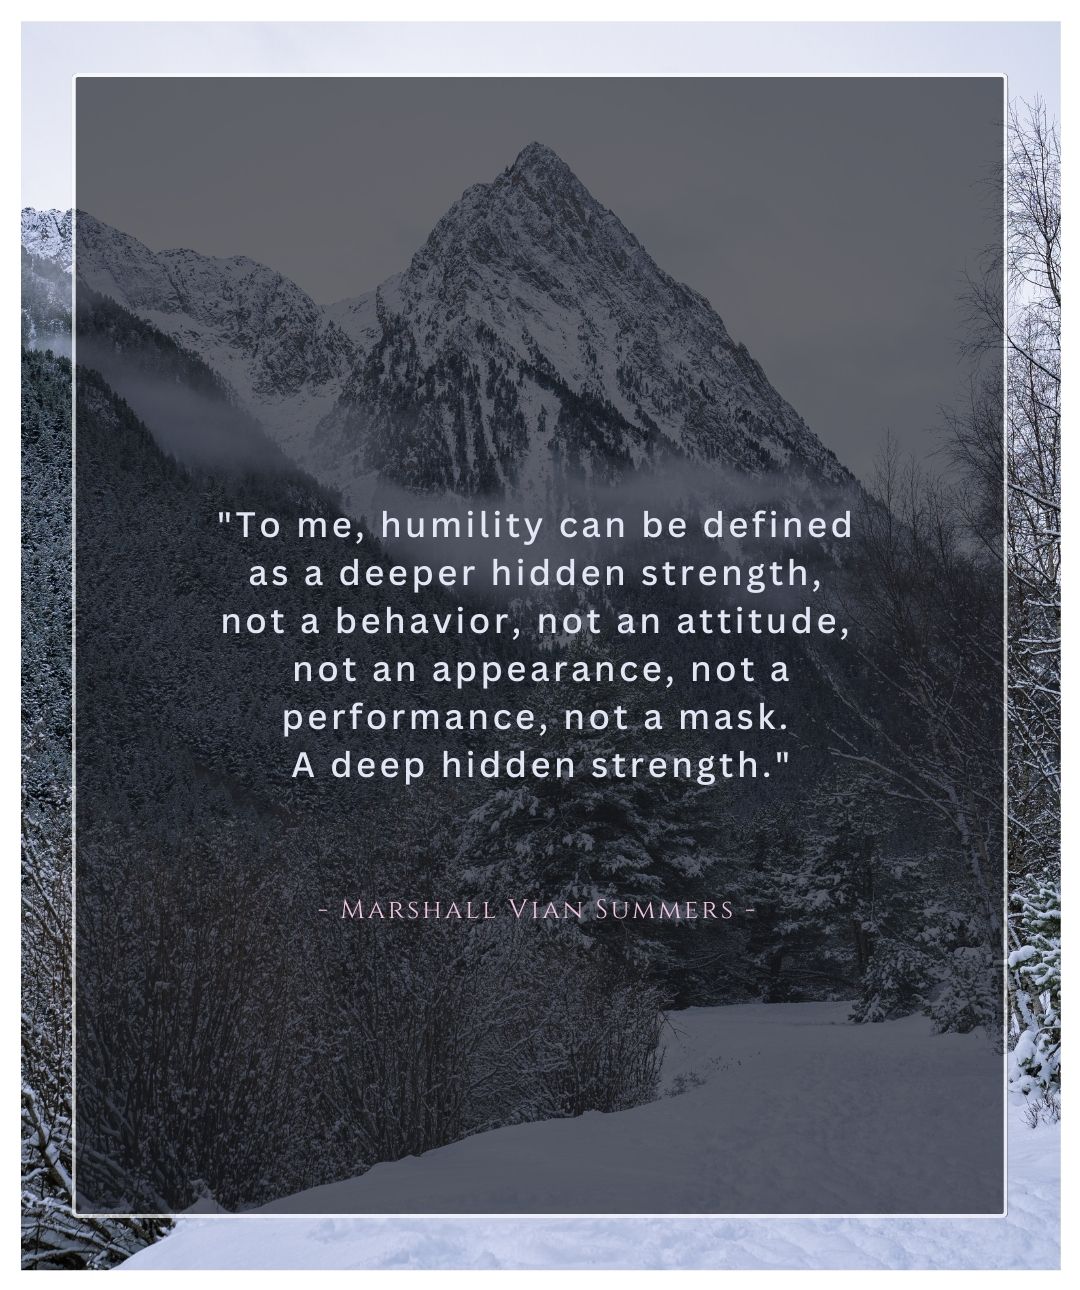 Humility is not a behaviour